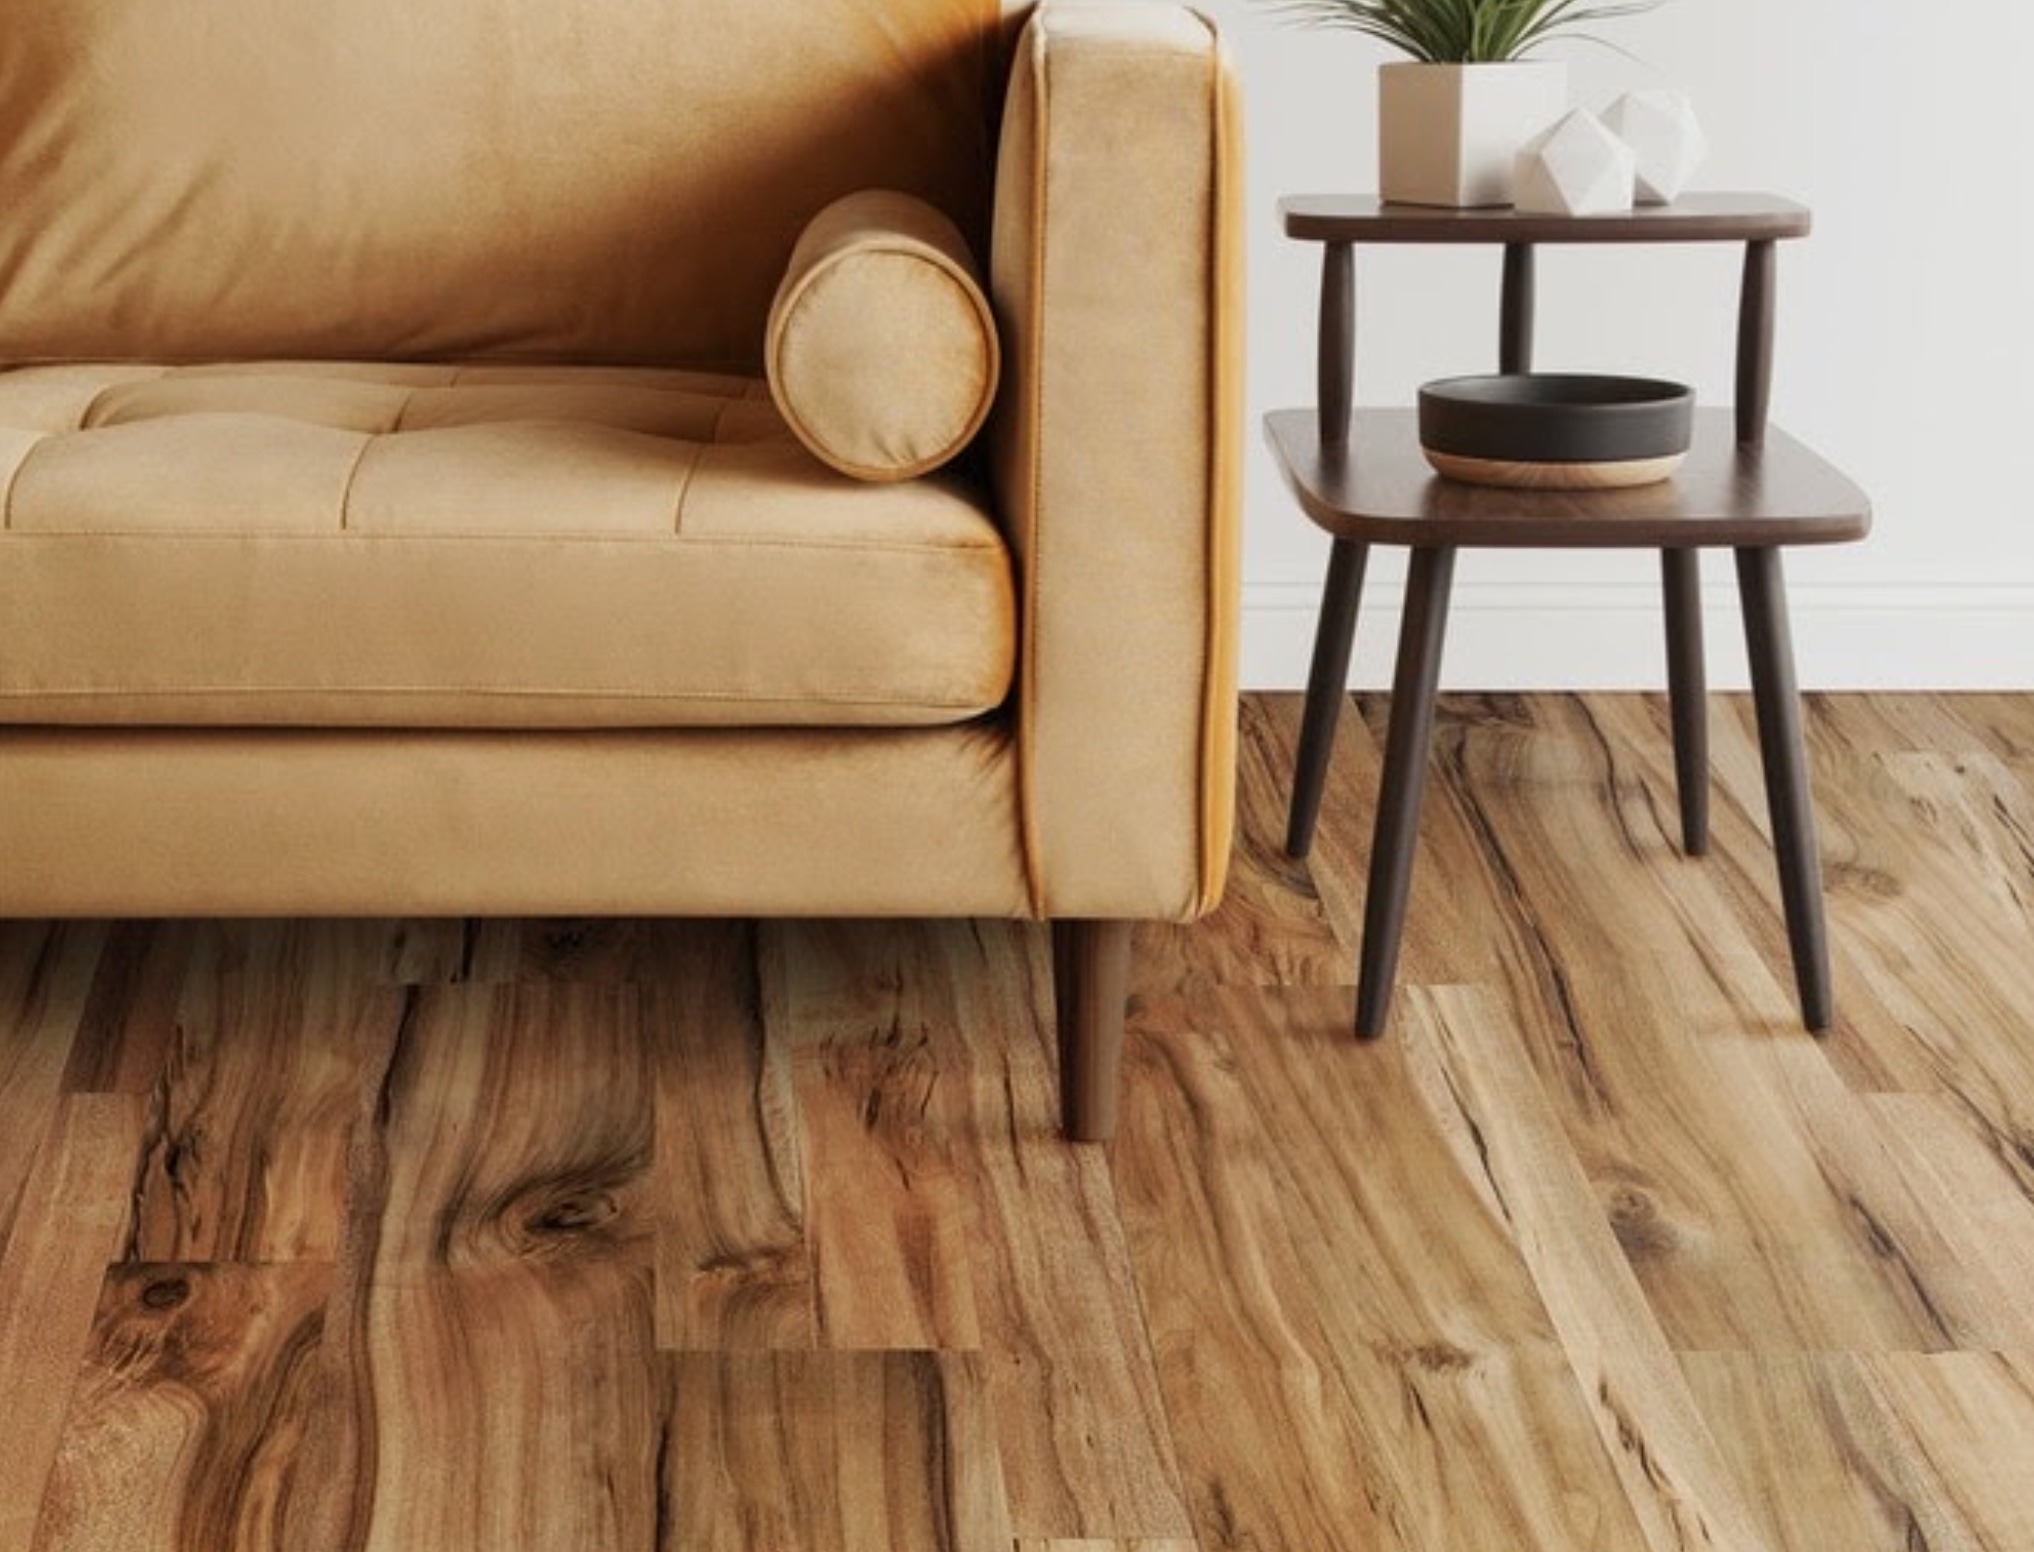 Give Your Home a Different Look Through Laminate Flooring